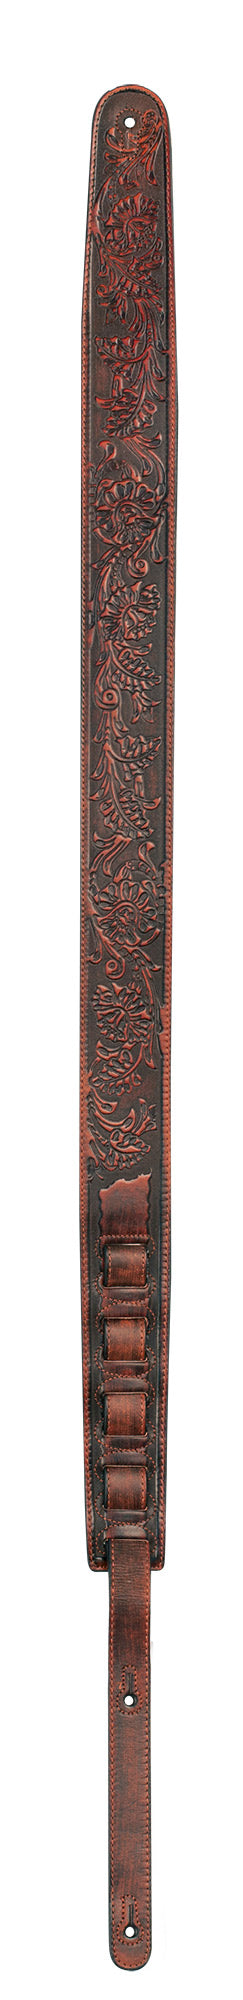 Leather Guitar Strap - Country Brown